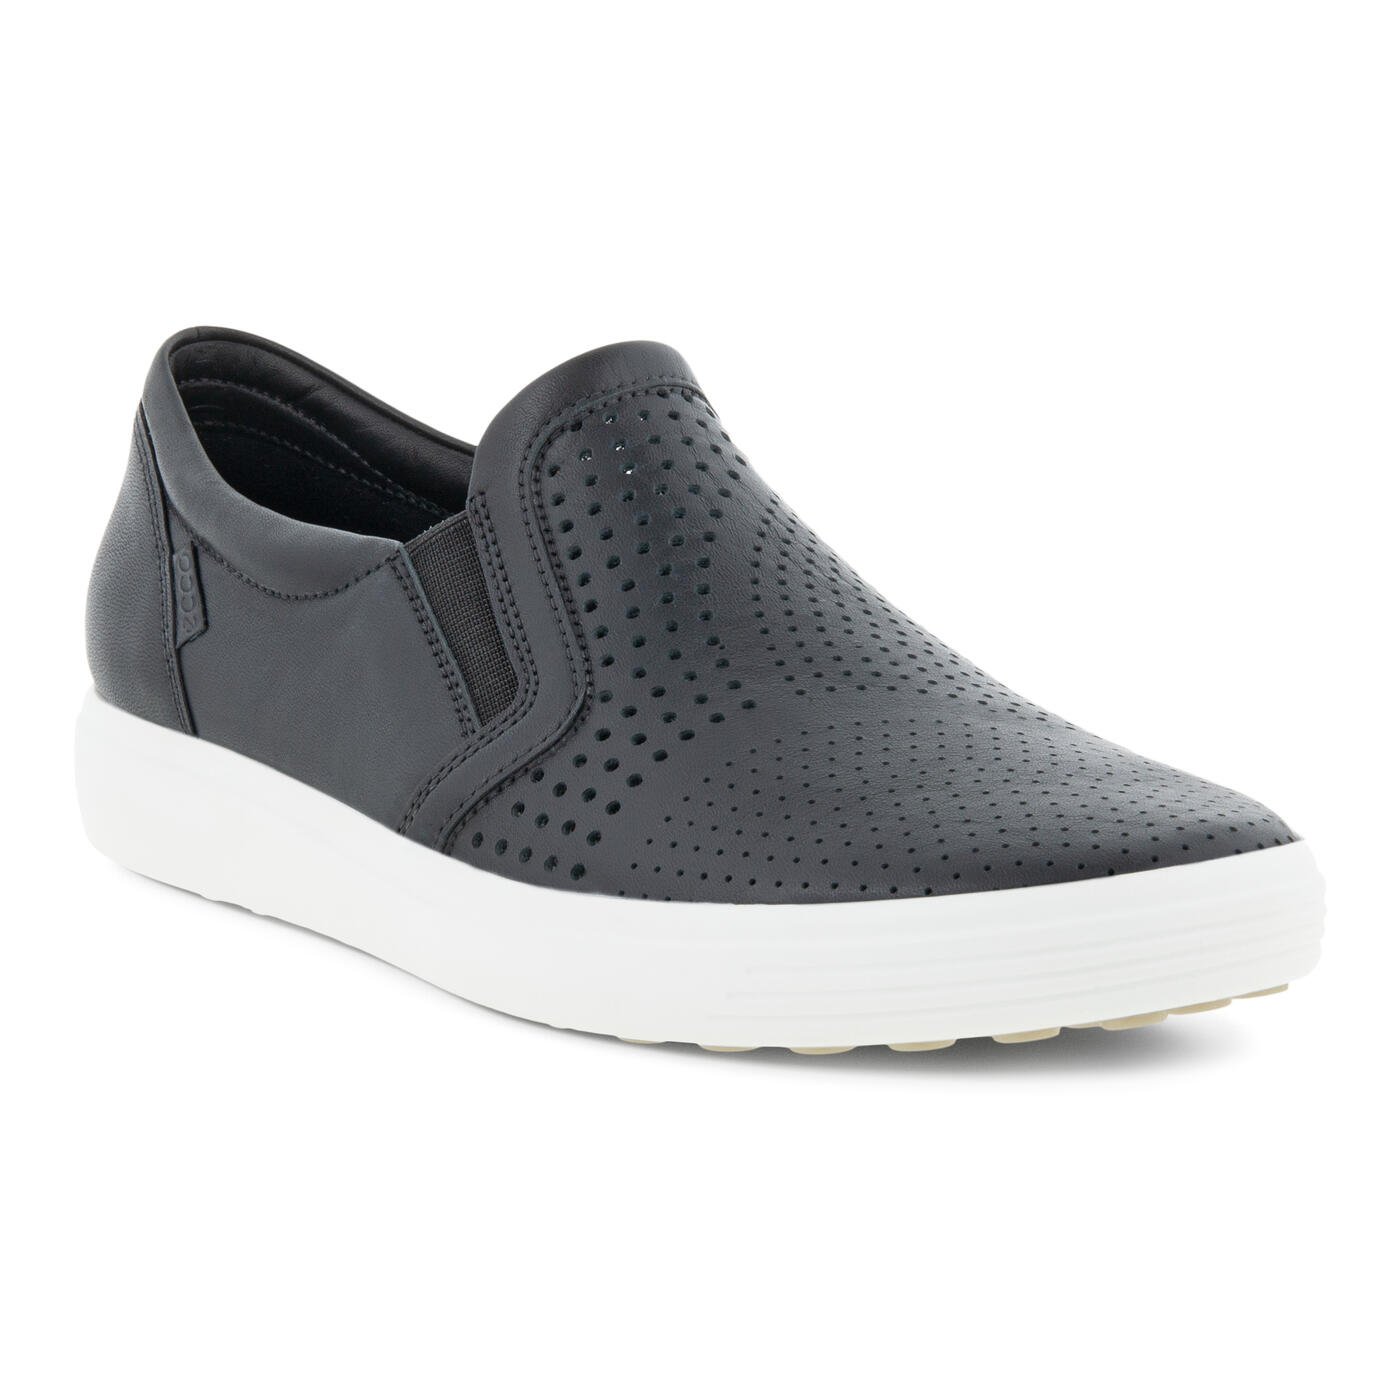 Women's Soft 7 Slip On Sneakers | ECCO® Shoes